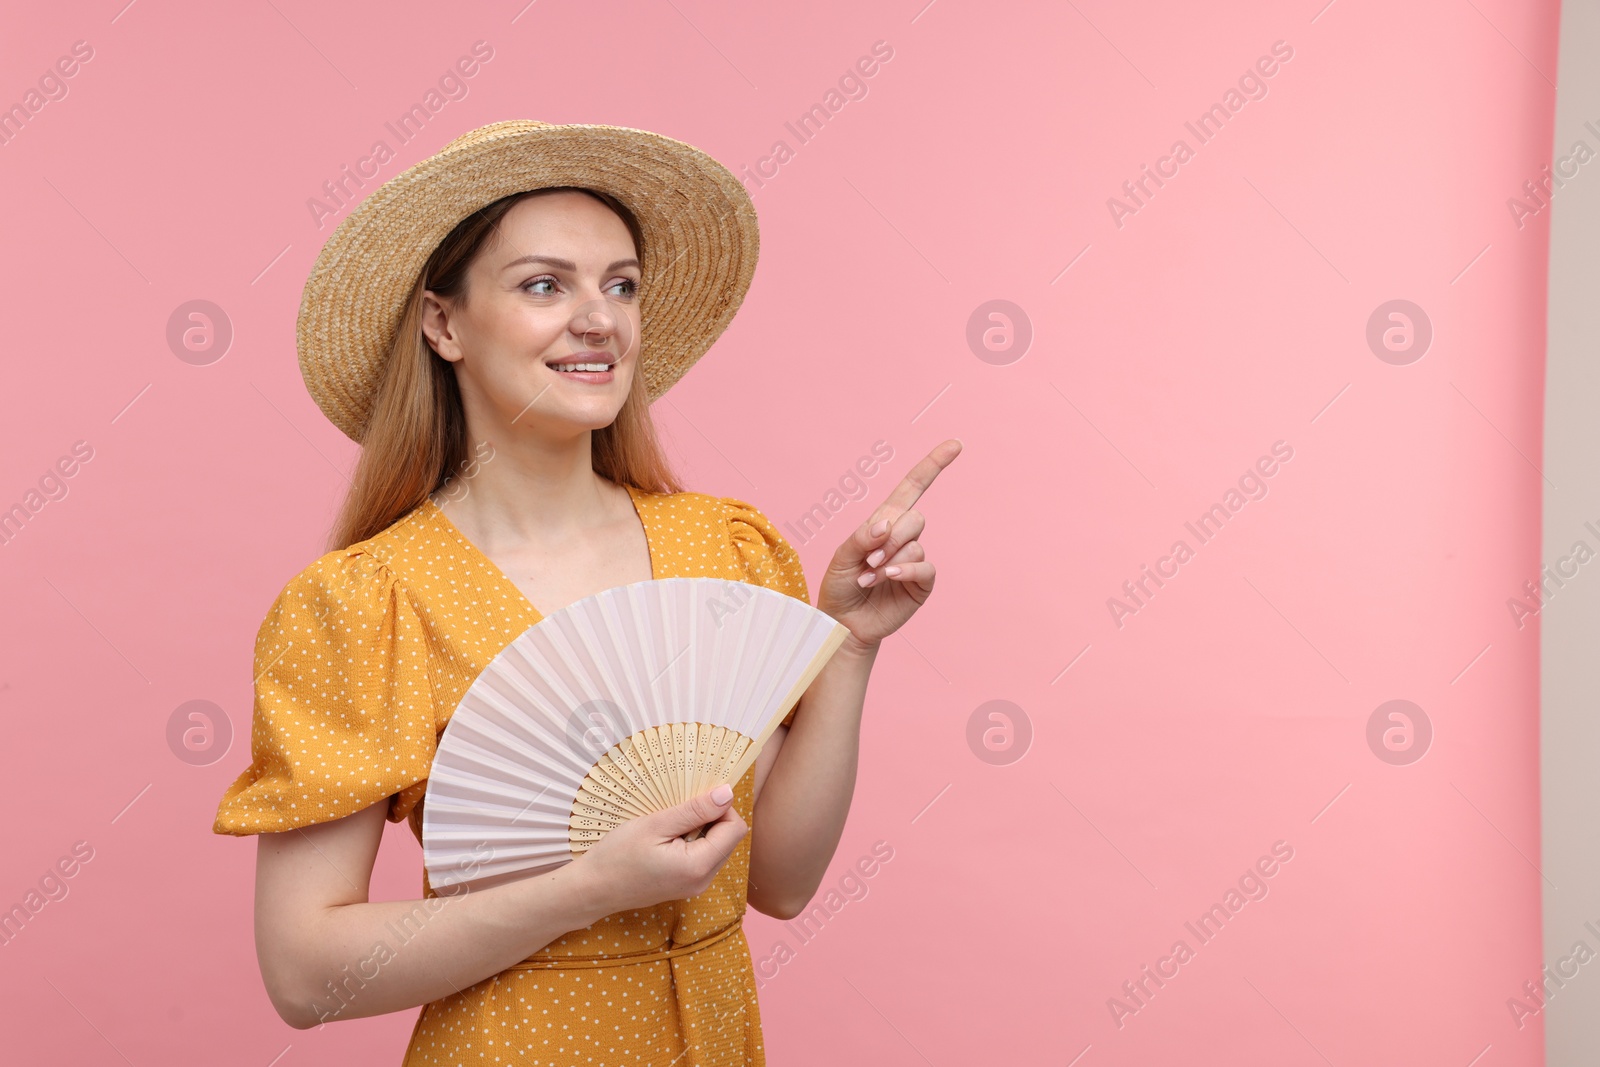 Photo of Happy woman with hand fan pointing on pink background